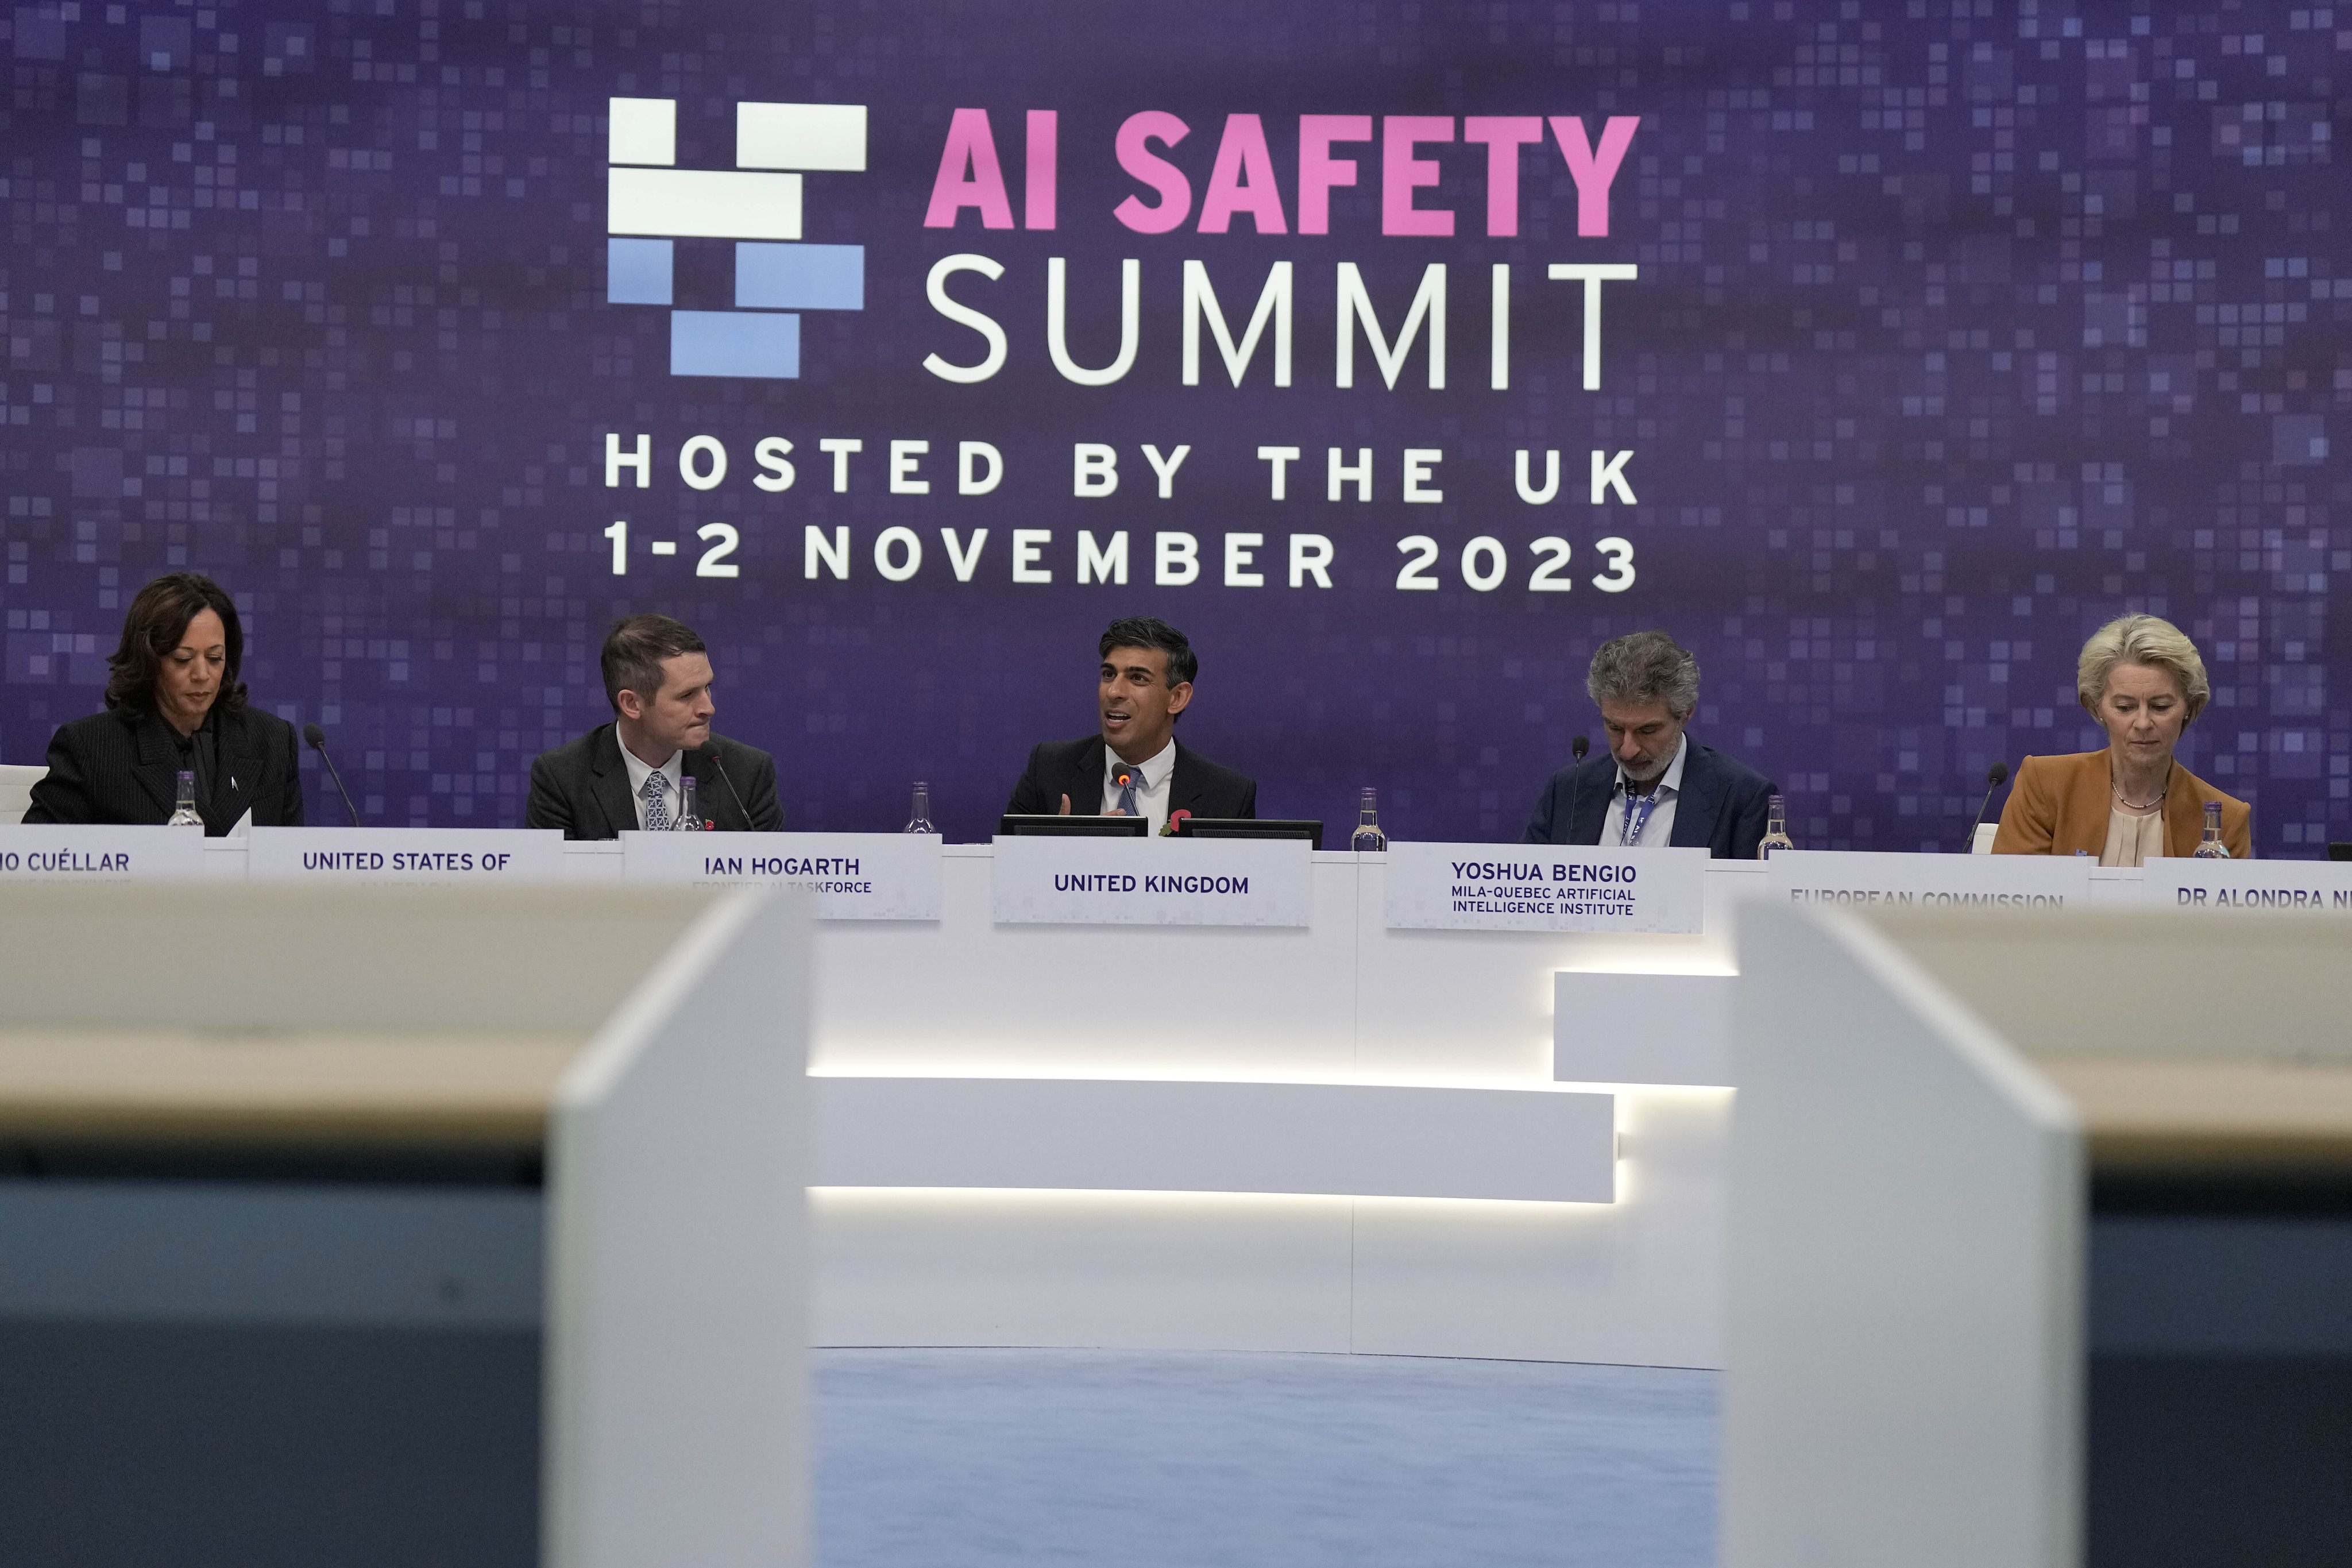 Britain’s Prime Minister Rishi Sunk, centre, speaks during a plenary session at the AI Safety Summit in Milton Keynes, England, on November 2, 2023. Photo: AP